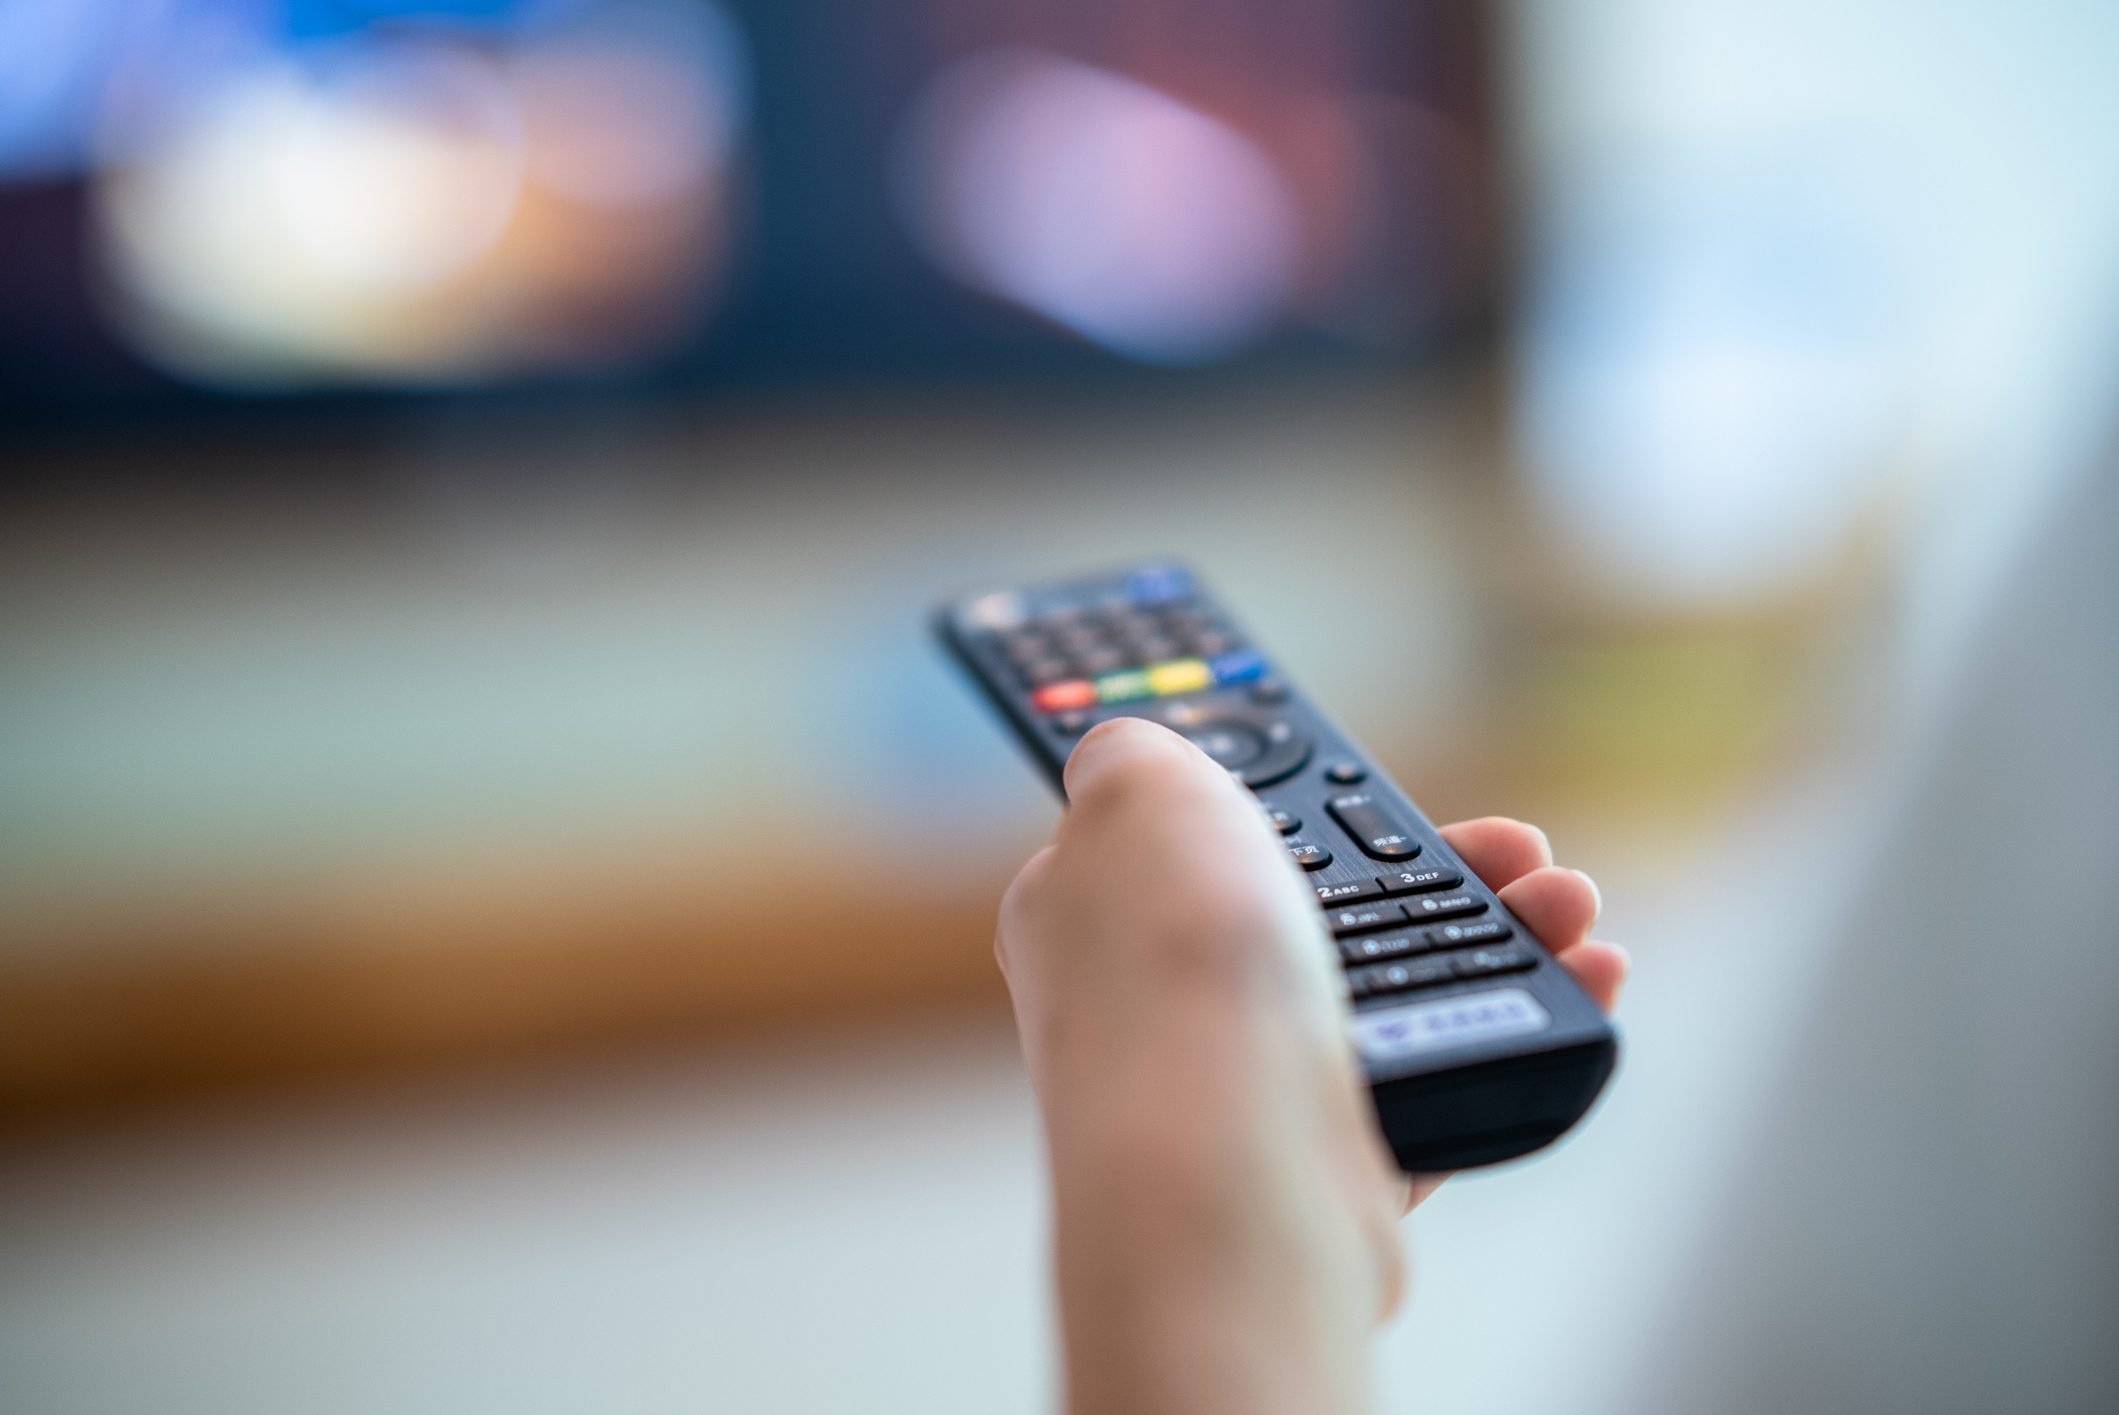 Here's How Much TV May Increase Your Dementia Risk, Says New Study